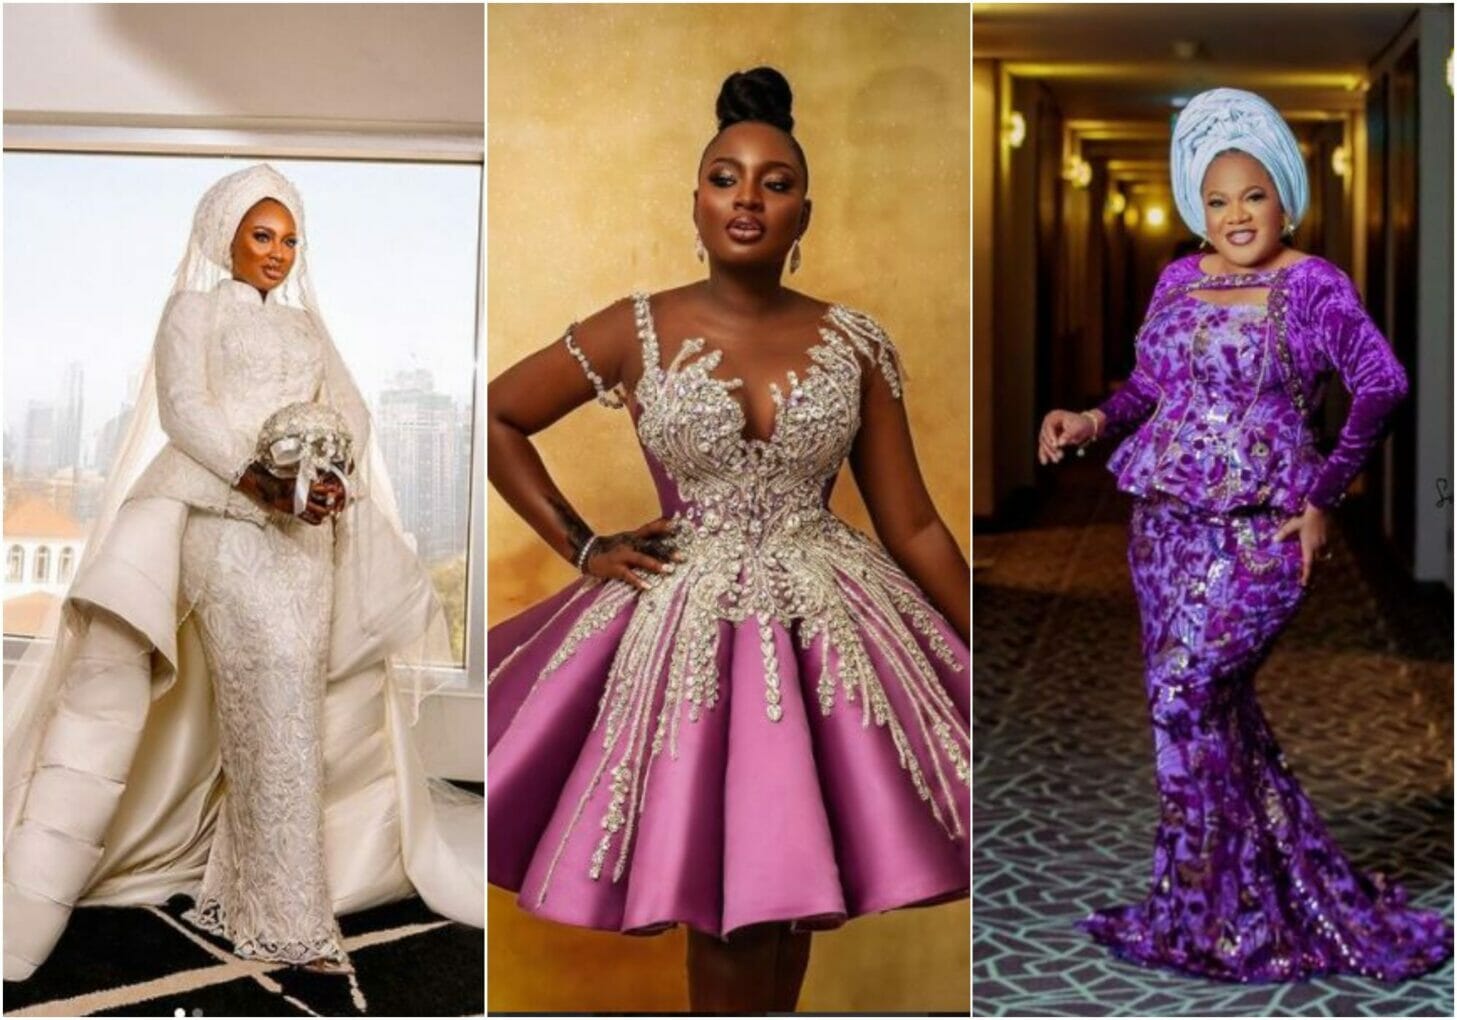 How Actress Toyin Abraham paid millions for Bimpe Oyebade's wedding dresses